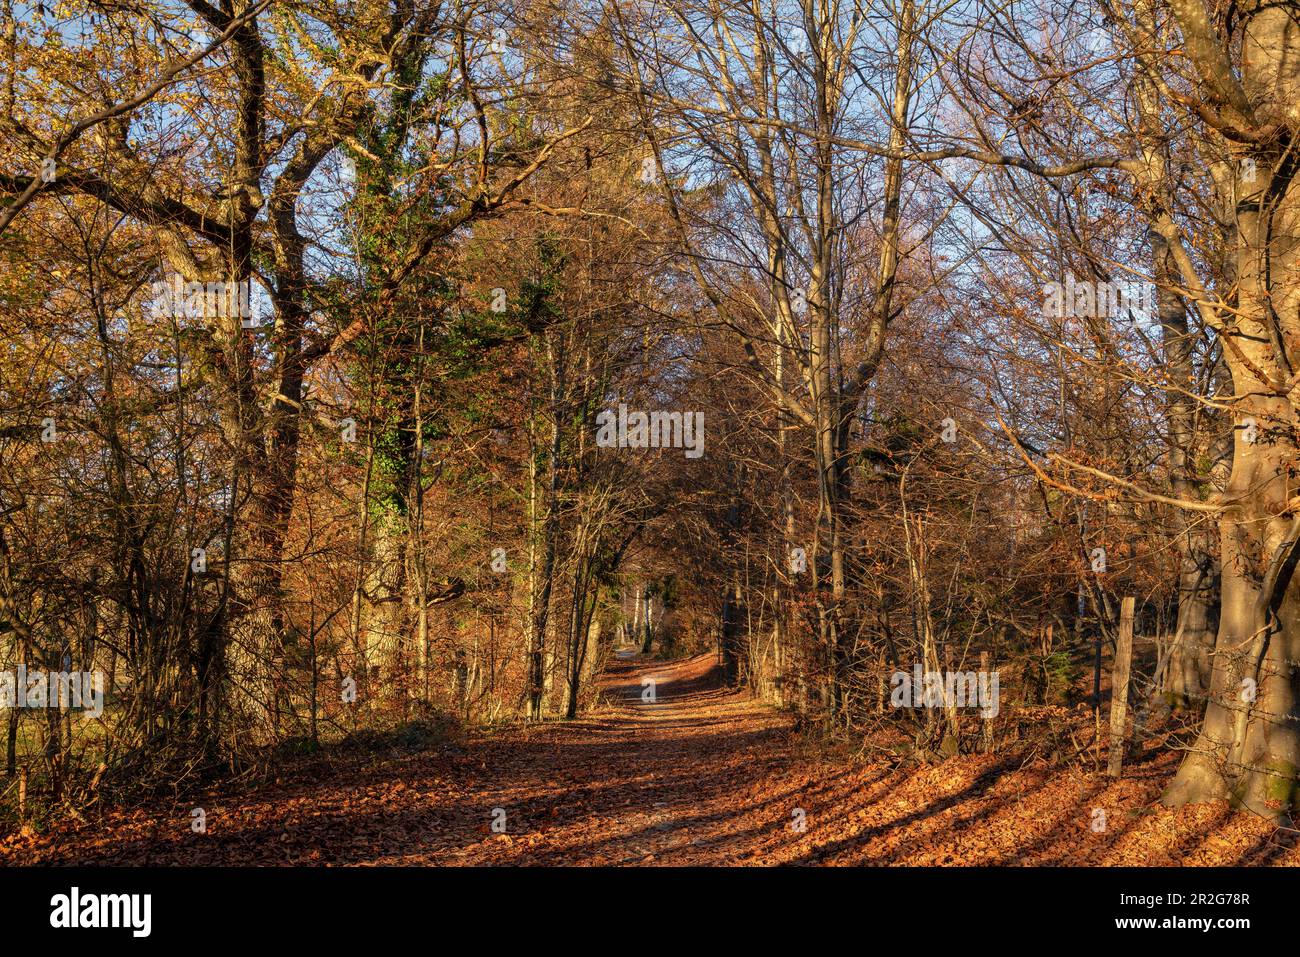 Late afternoon in November on the Andechser Höhenweg, Andechs, Upper Bavaria, Bavaria, Germany Stock Photo